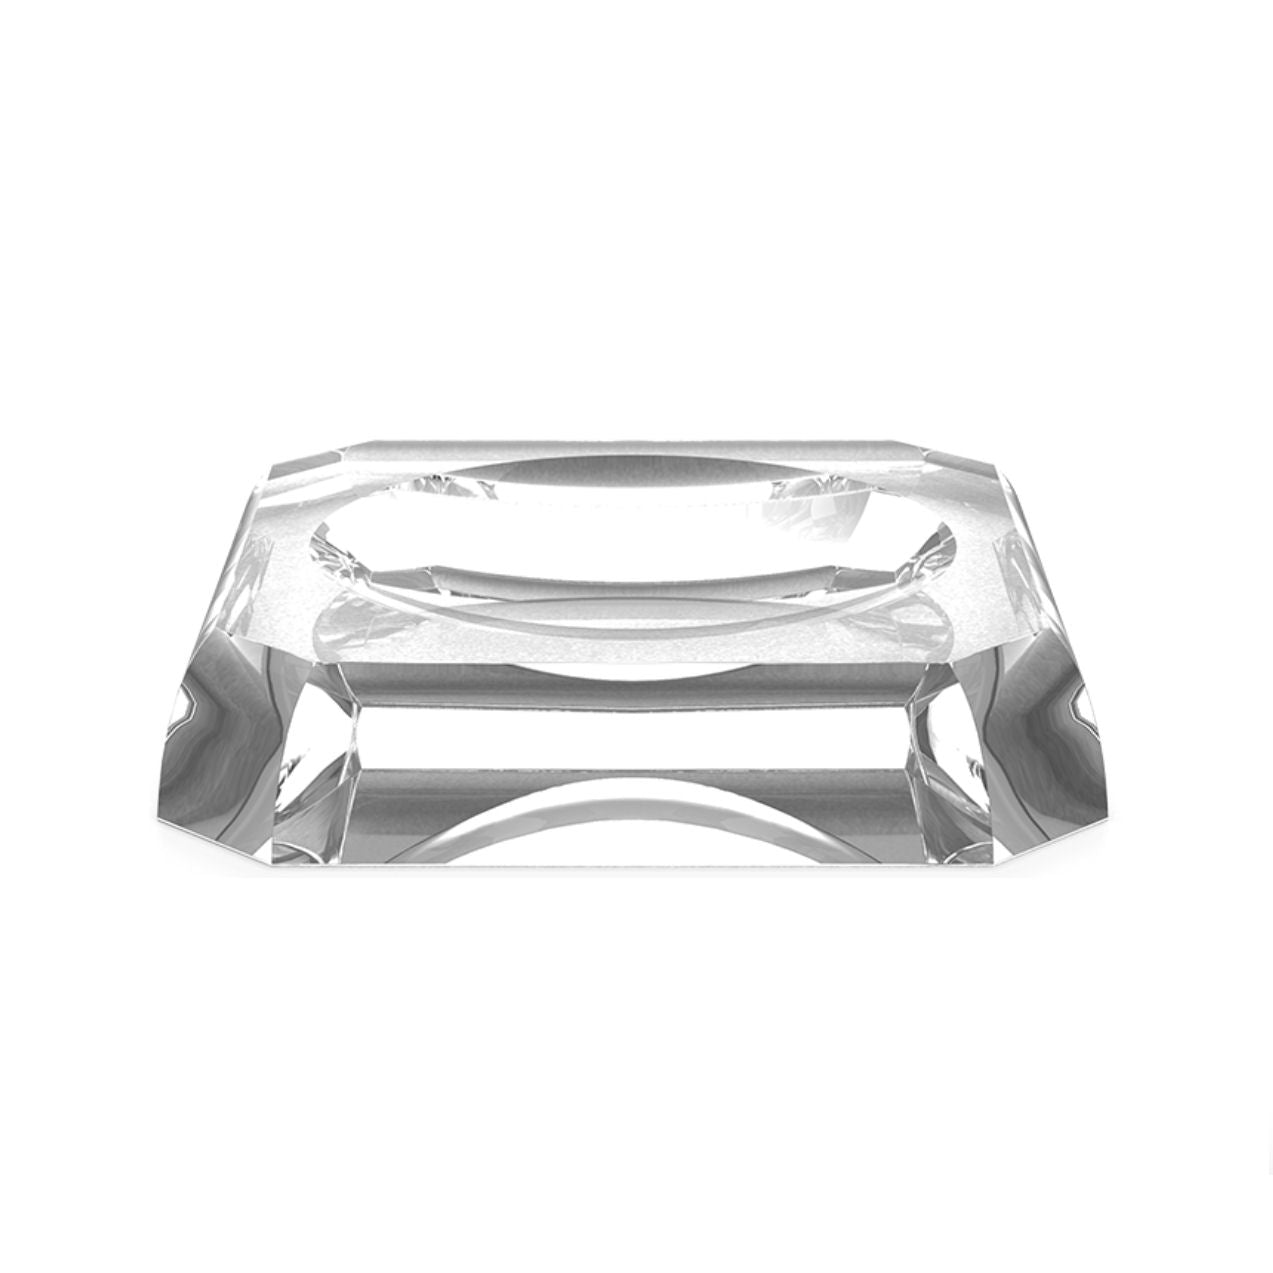 Crystal Clear Glass Bathroom Accessories Soap Dish by Decor Walther - |VESIMI Design|